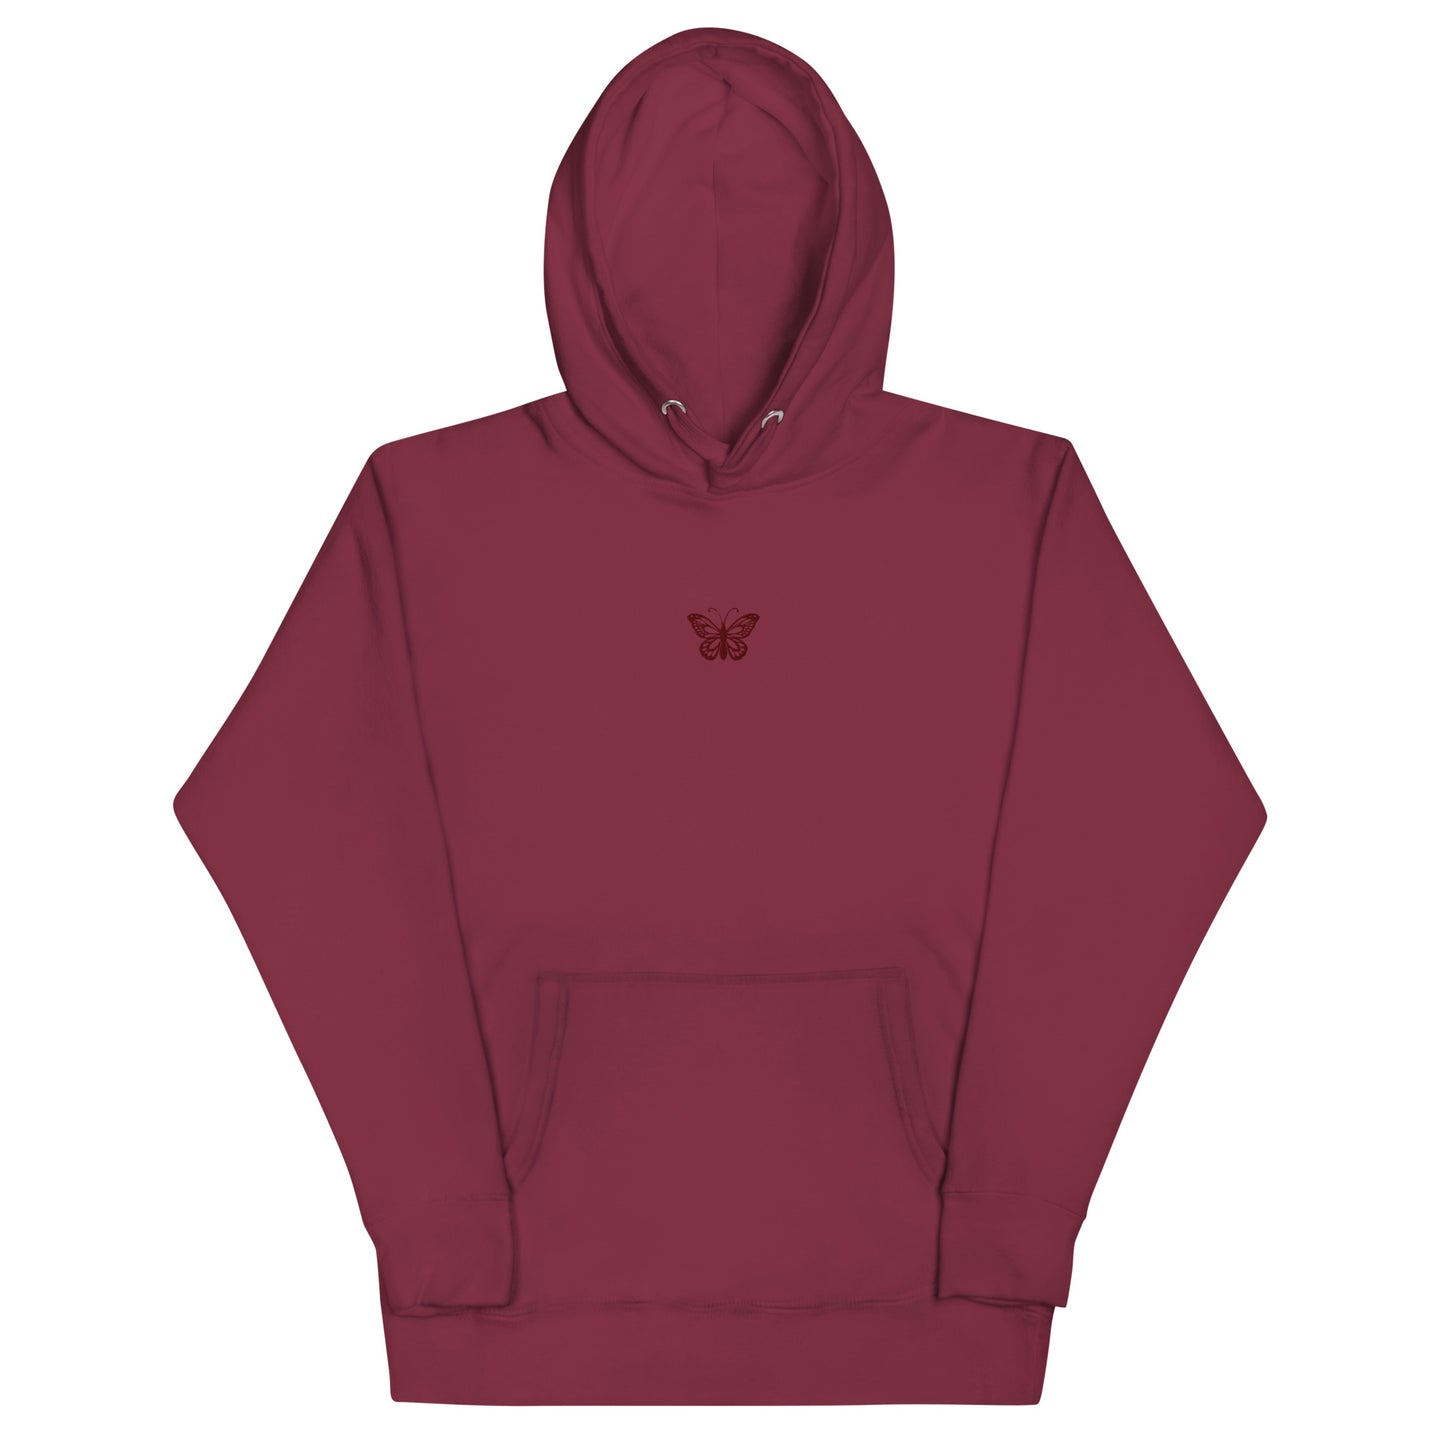 Maroon Hoodie / Sweatpants Matching Set Embroidered Butterfly